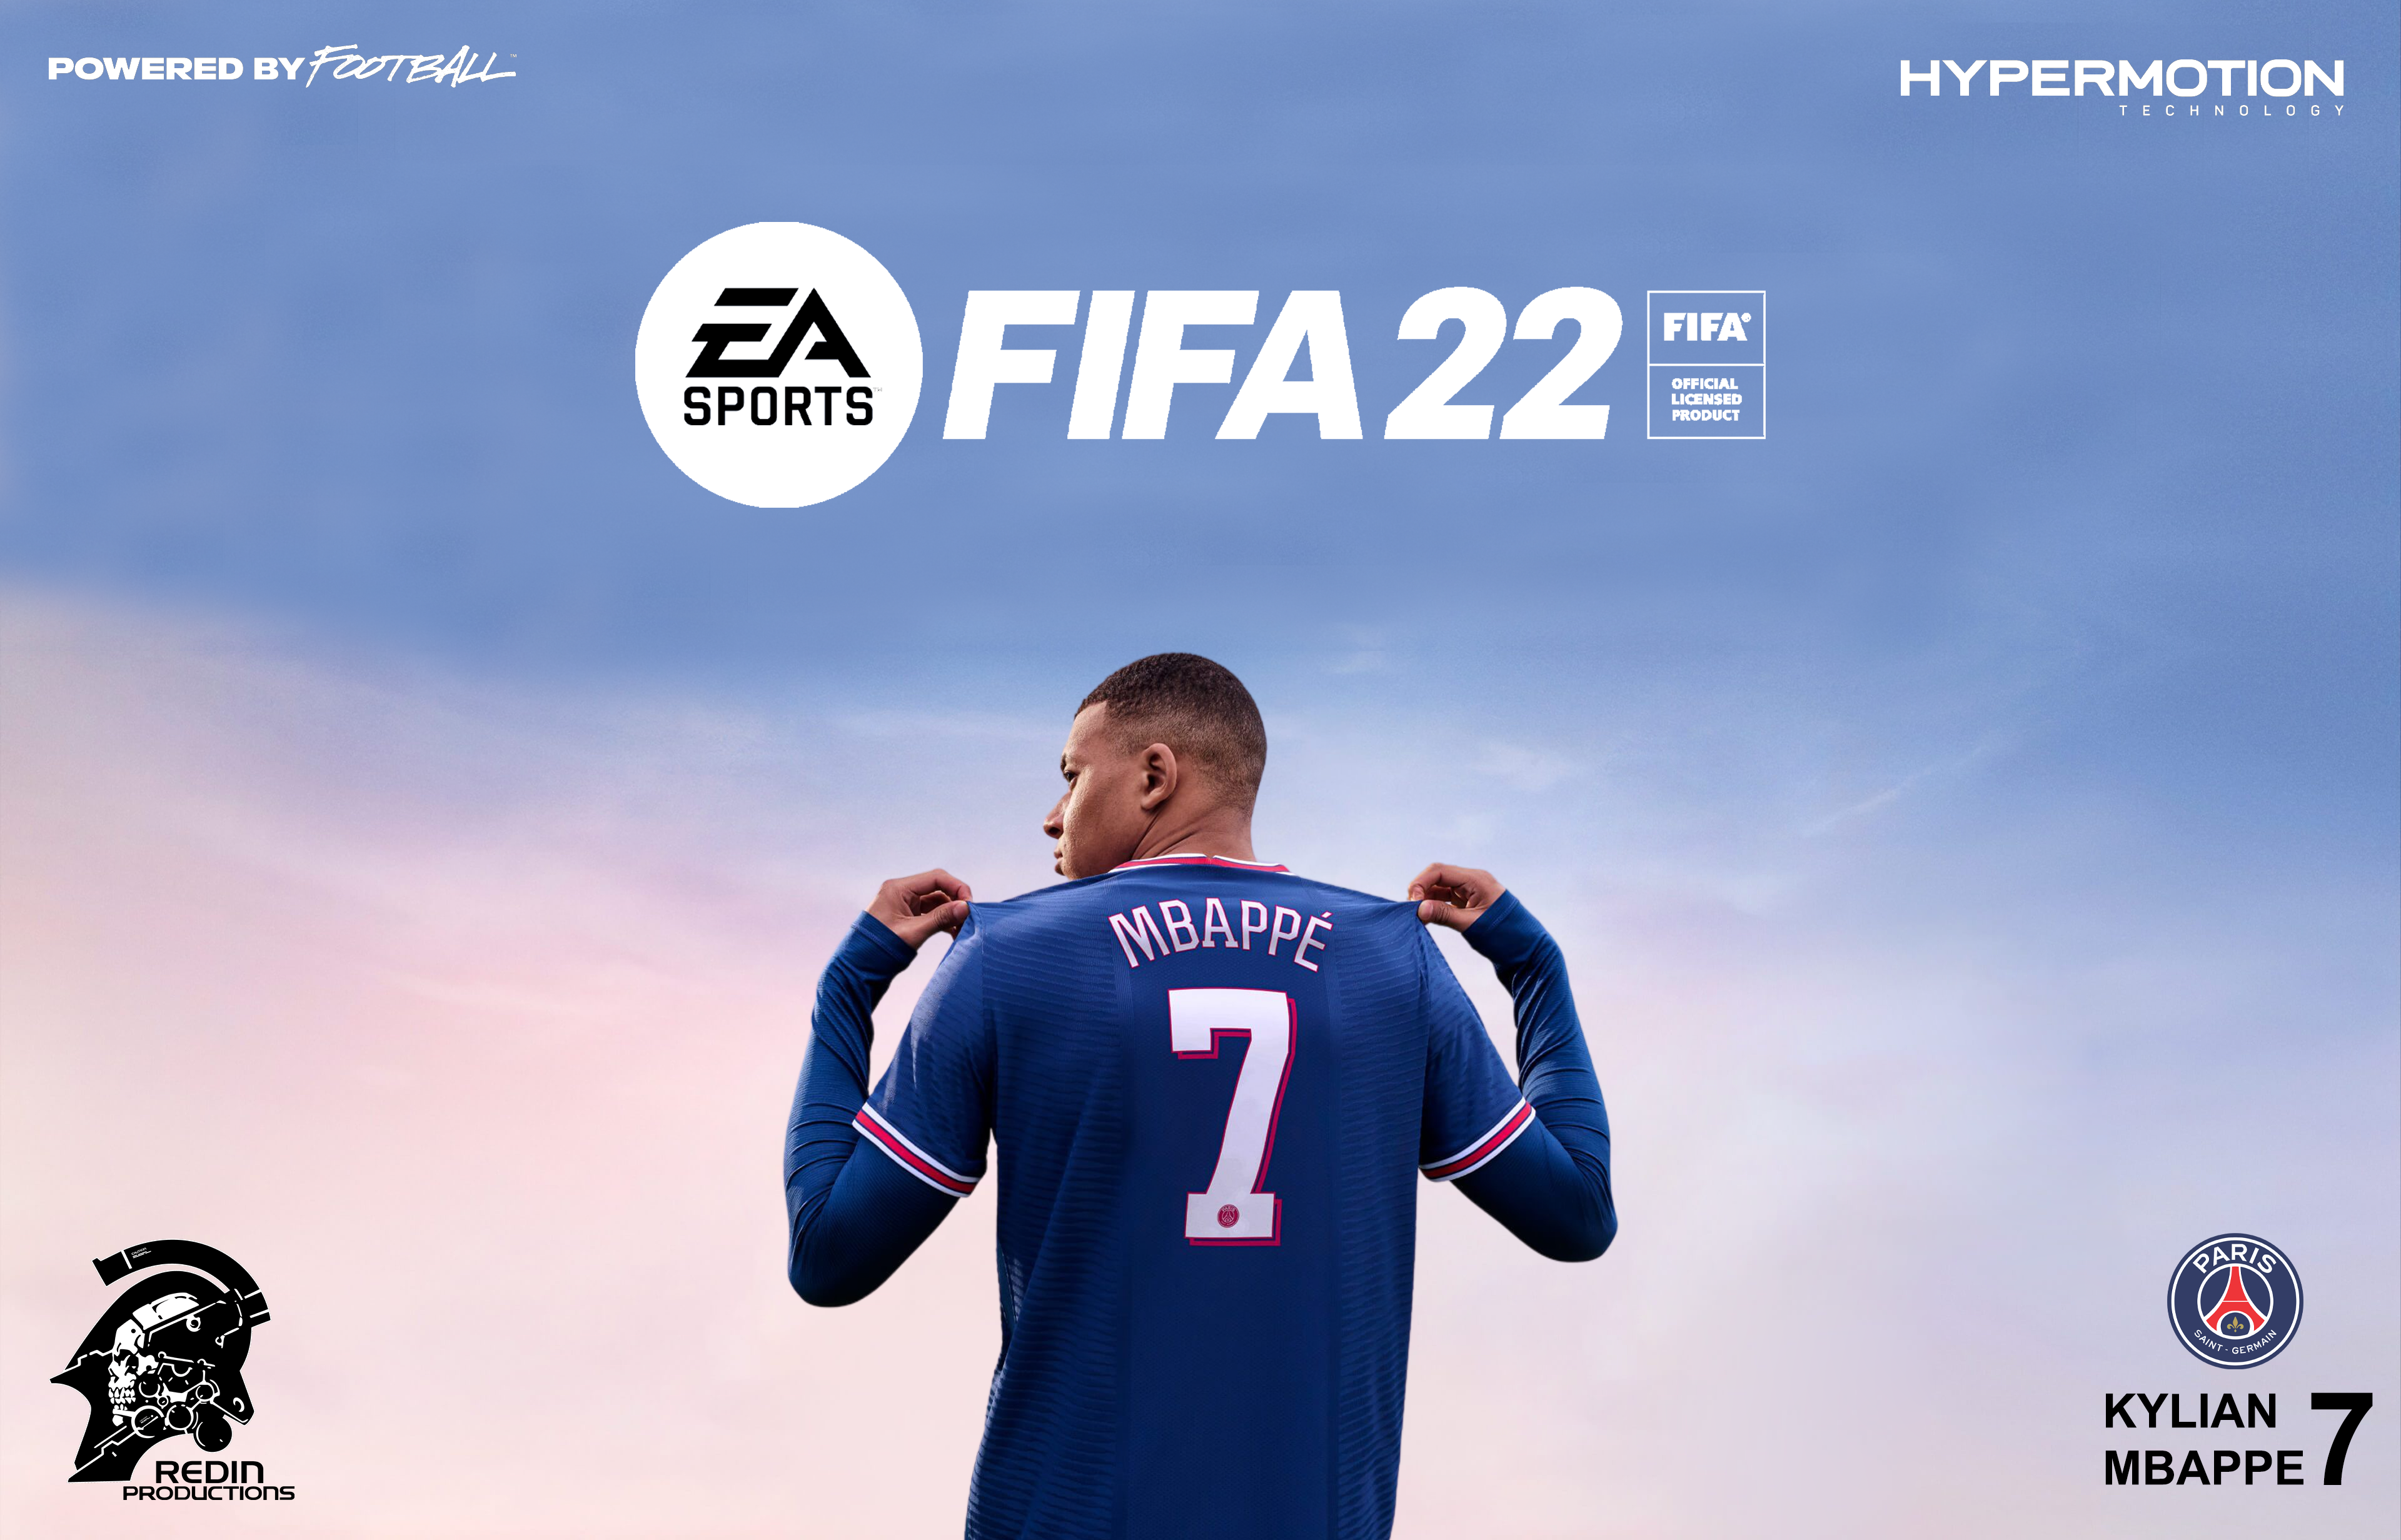 FIFA 22 Wallpapers